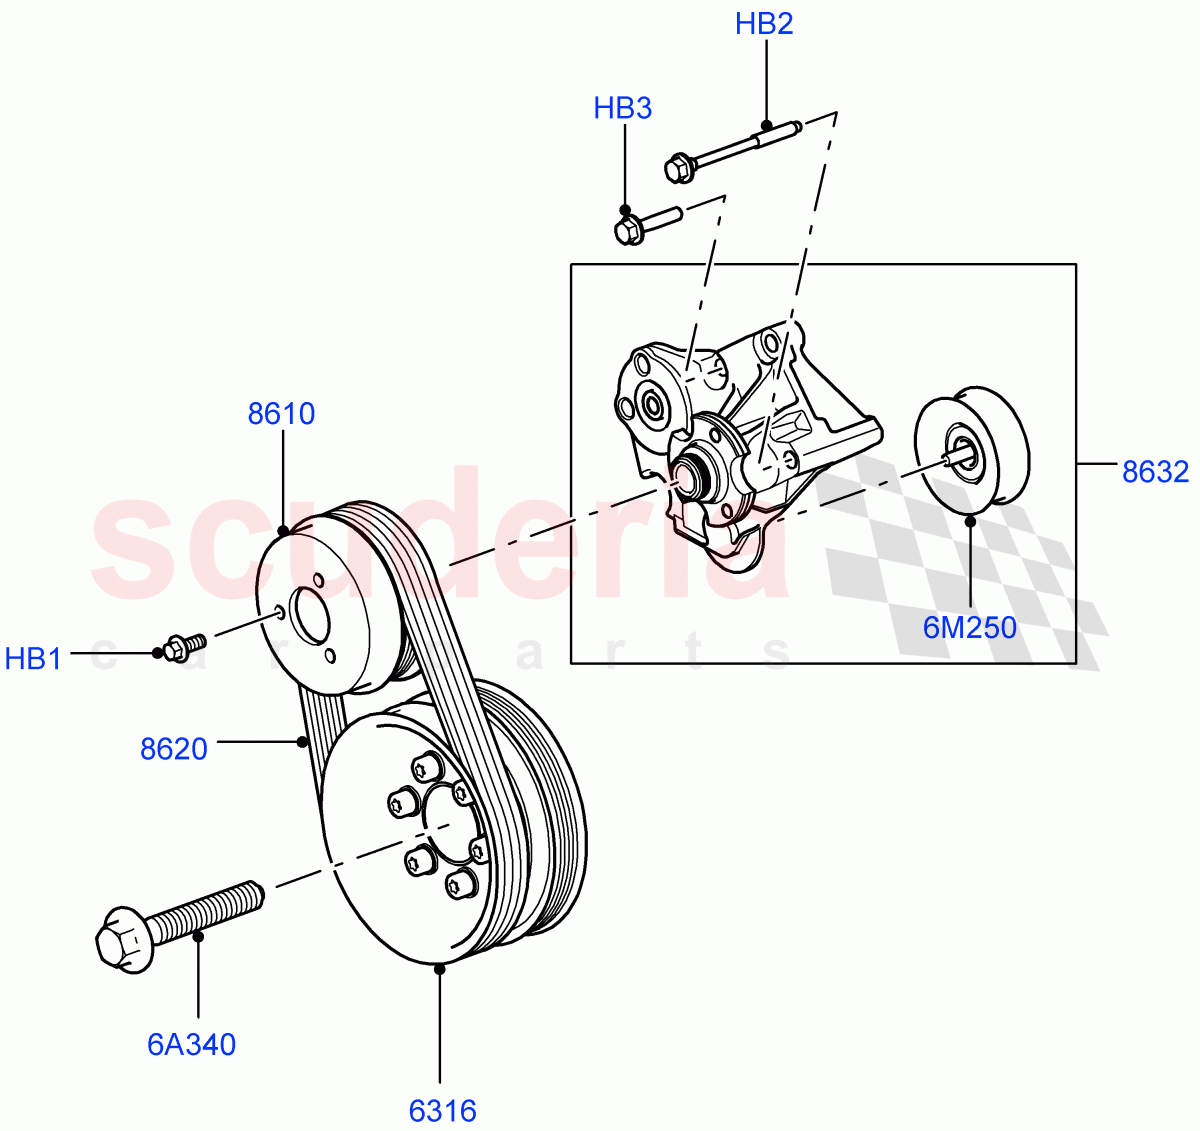 Pulleys And Drive Belts(Secondary Drive)(5.0L OHC SGDI NA V8 Petrol - AJ133)((V)FROMAA000001) of Land Rover Land Rover Discovery 4 (2010-2016) [5.0 OHC SGDI NA V8 Petrol]